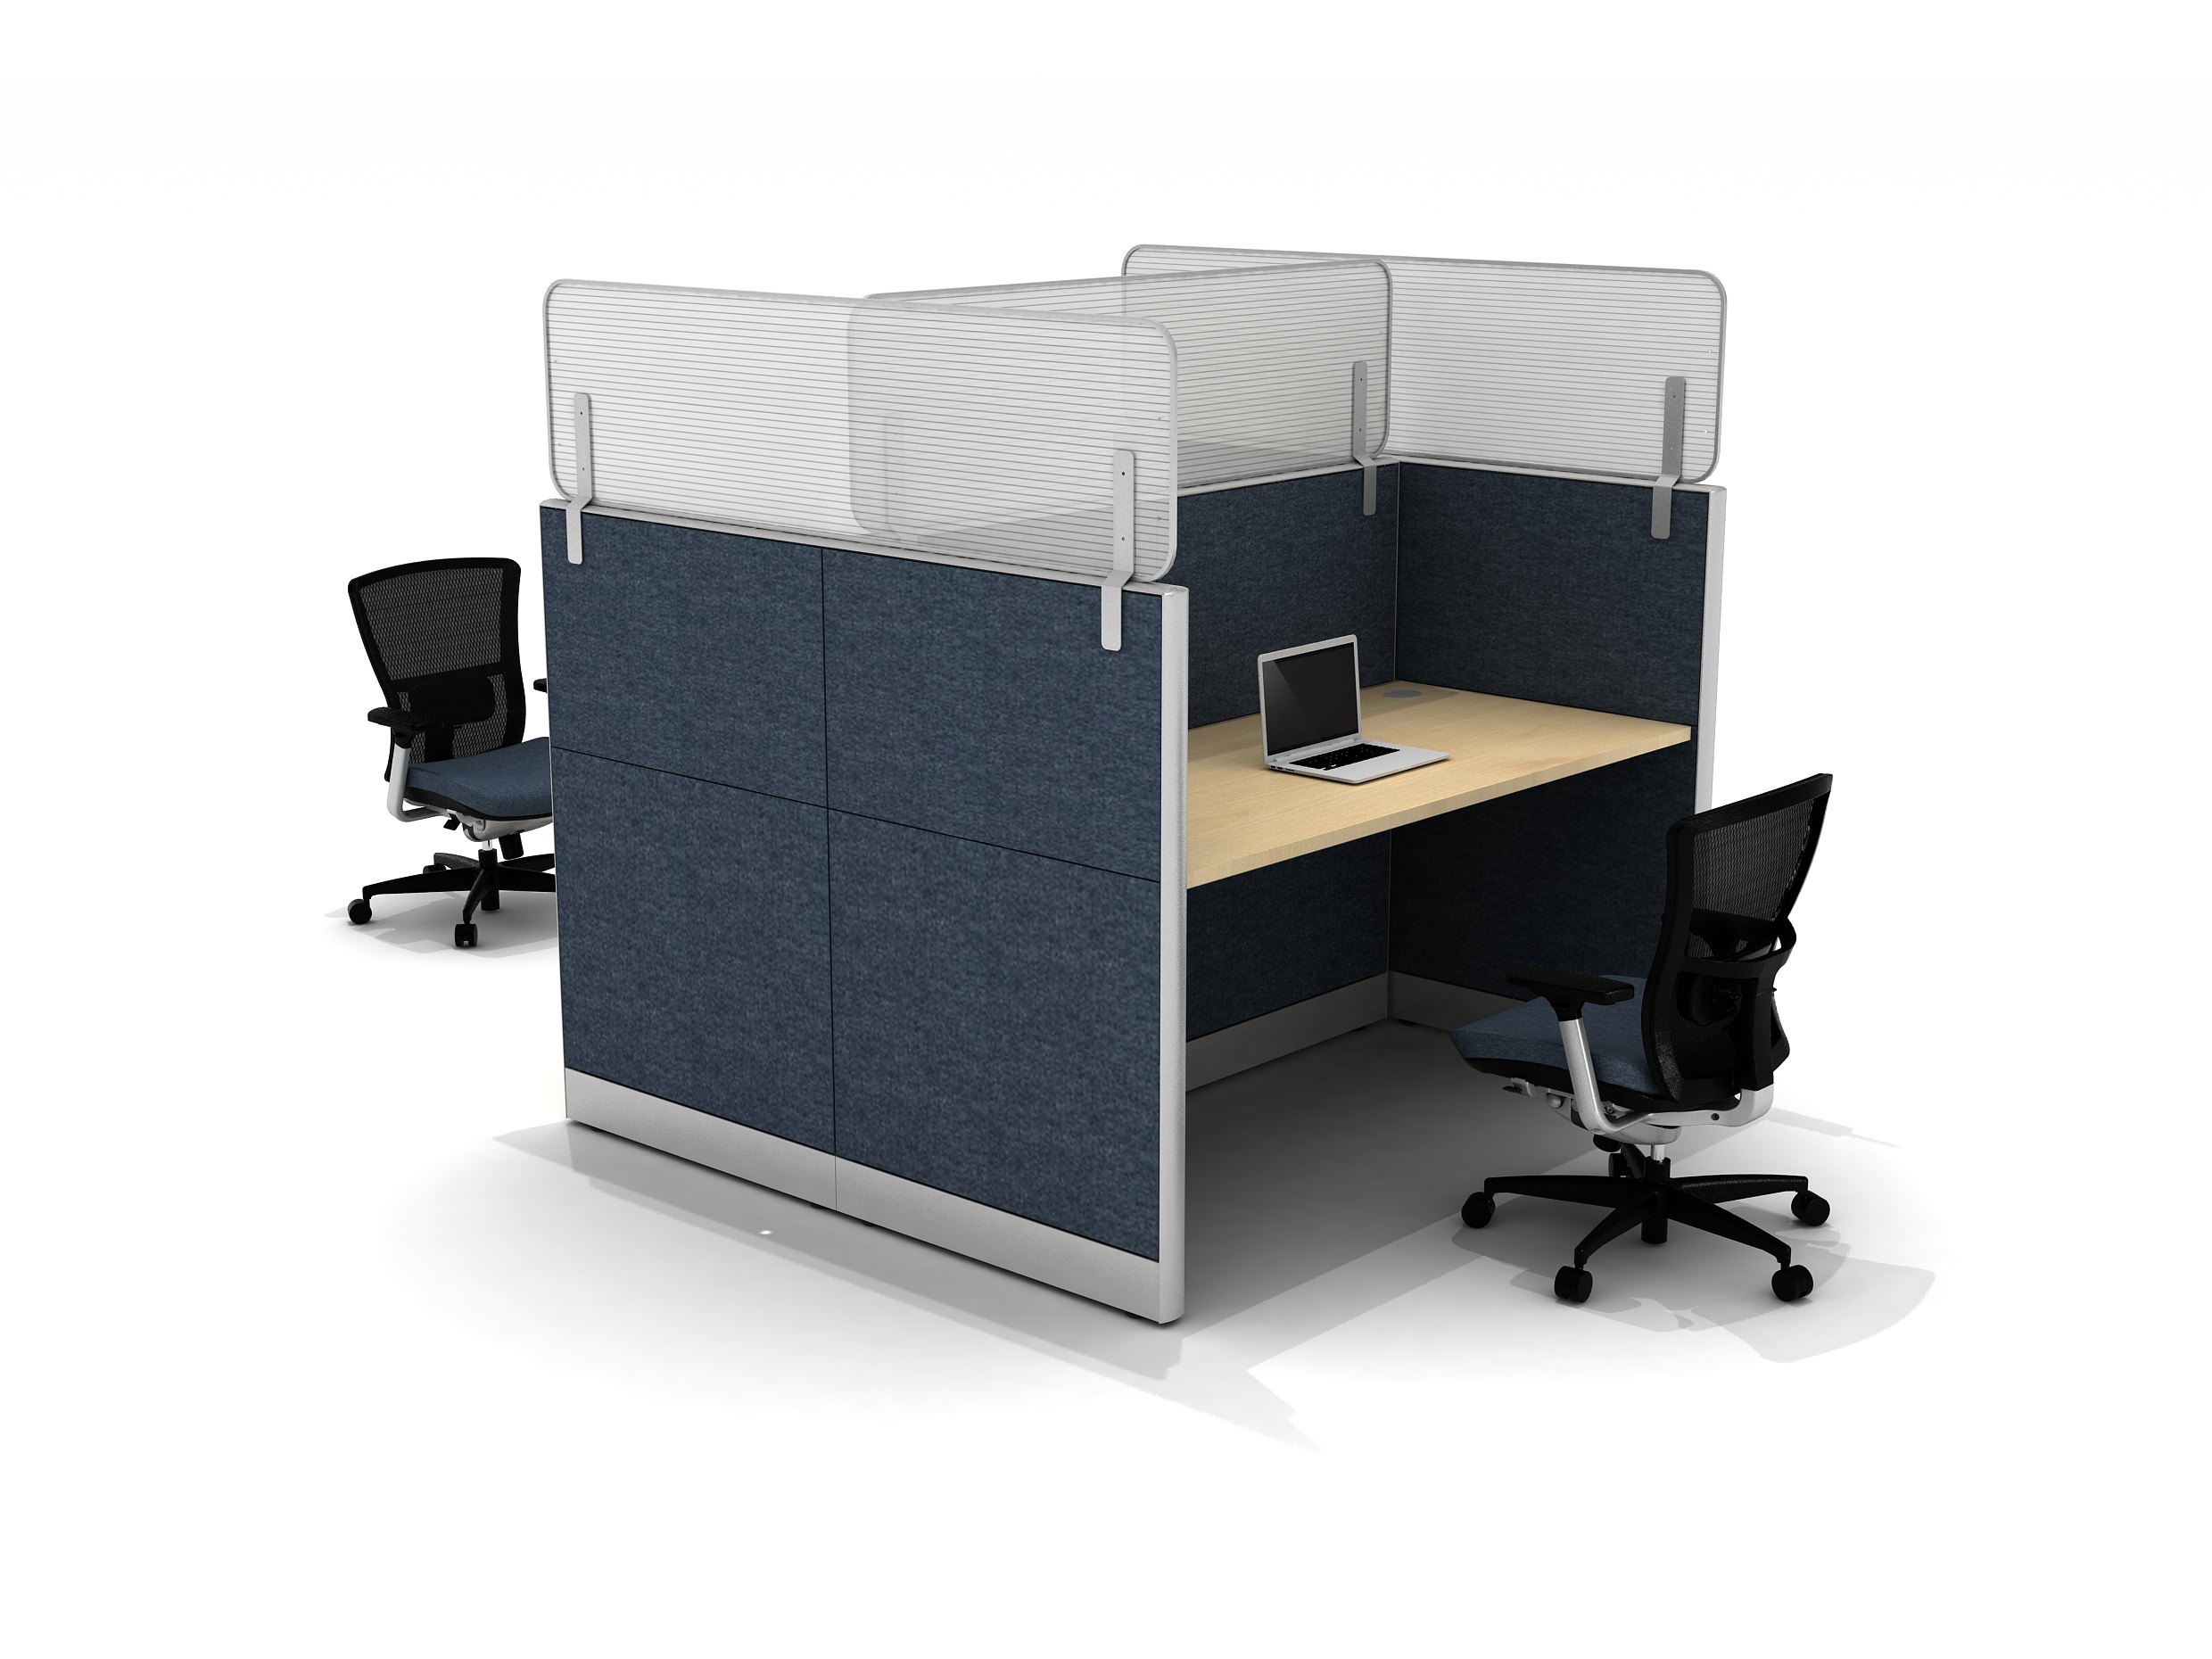 Blue RX2 panel double workstation with addon Shield polycarbonate panels paired with Soul chairs